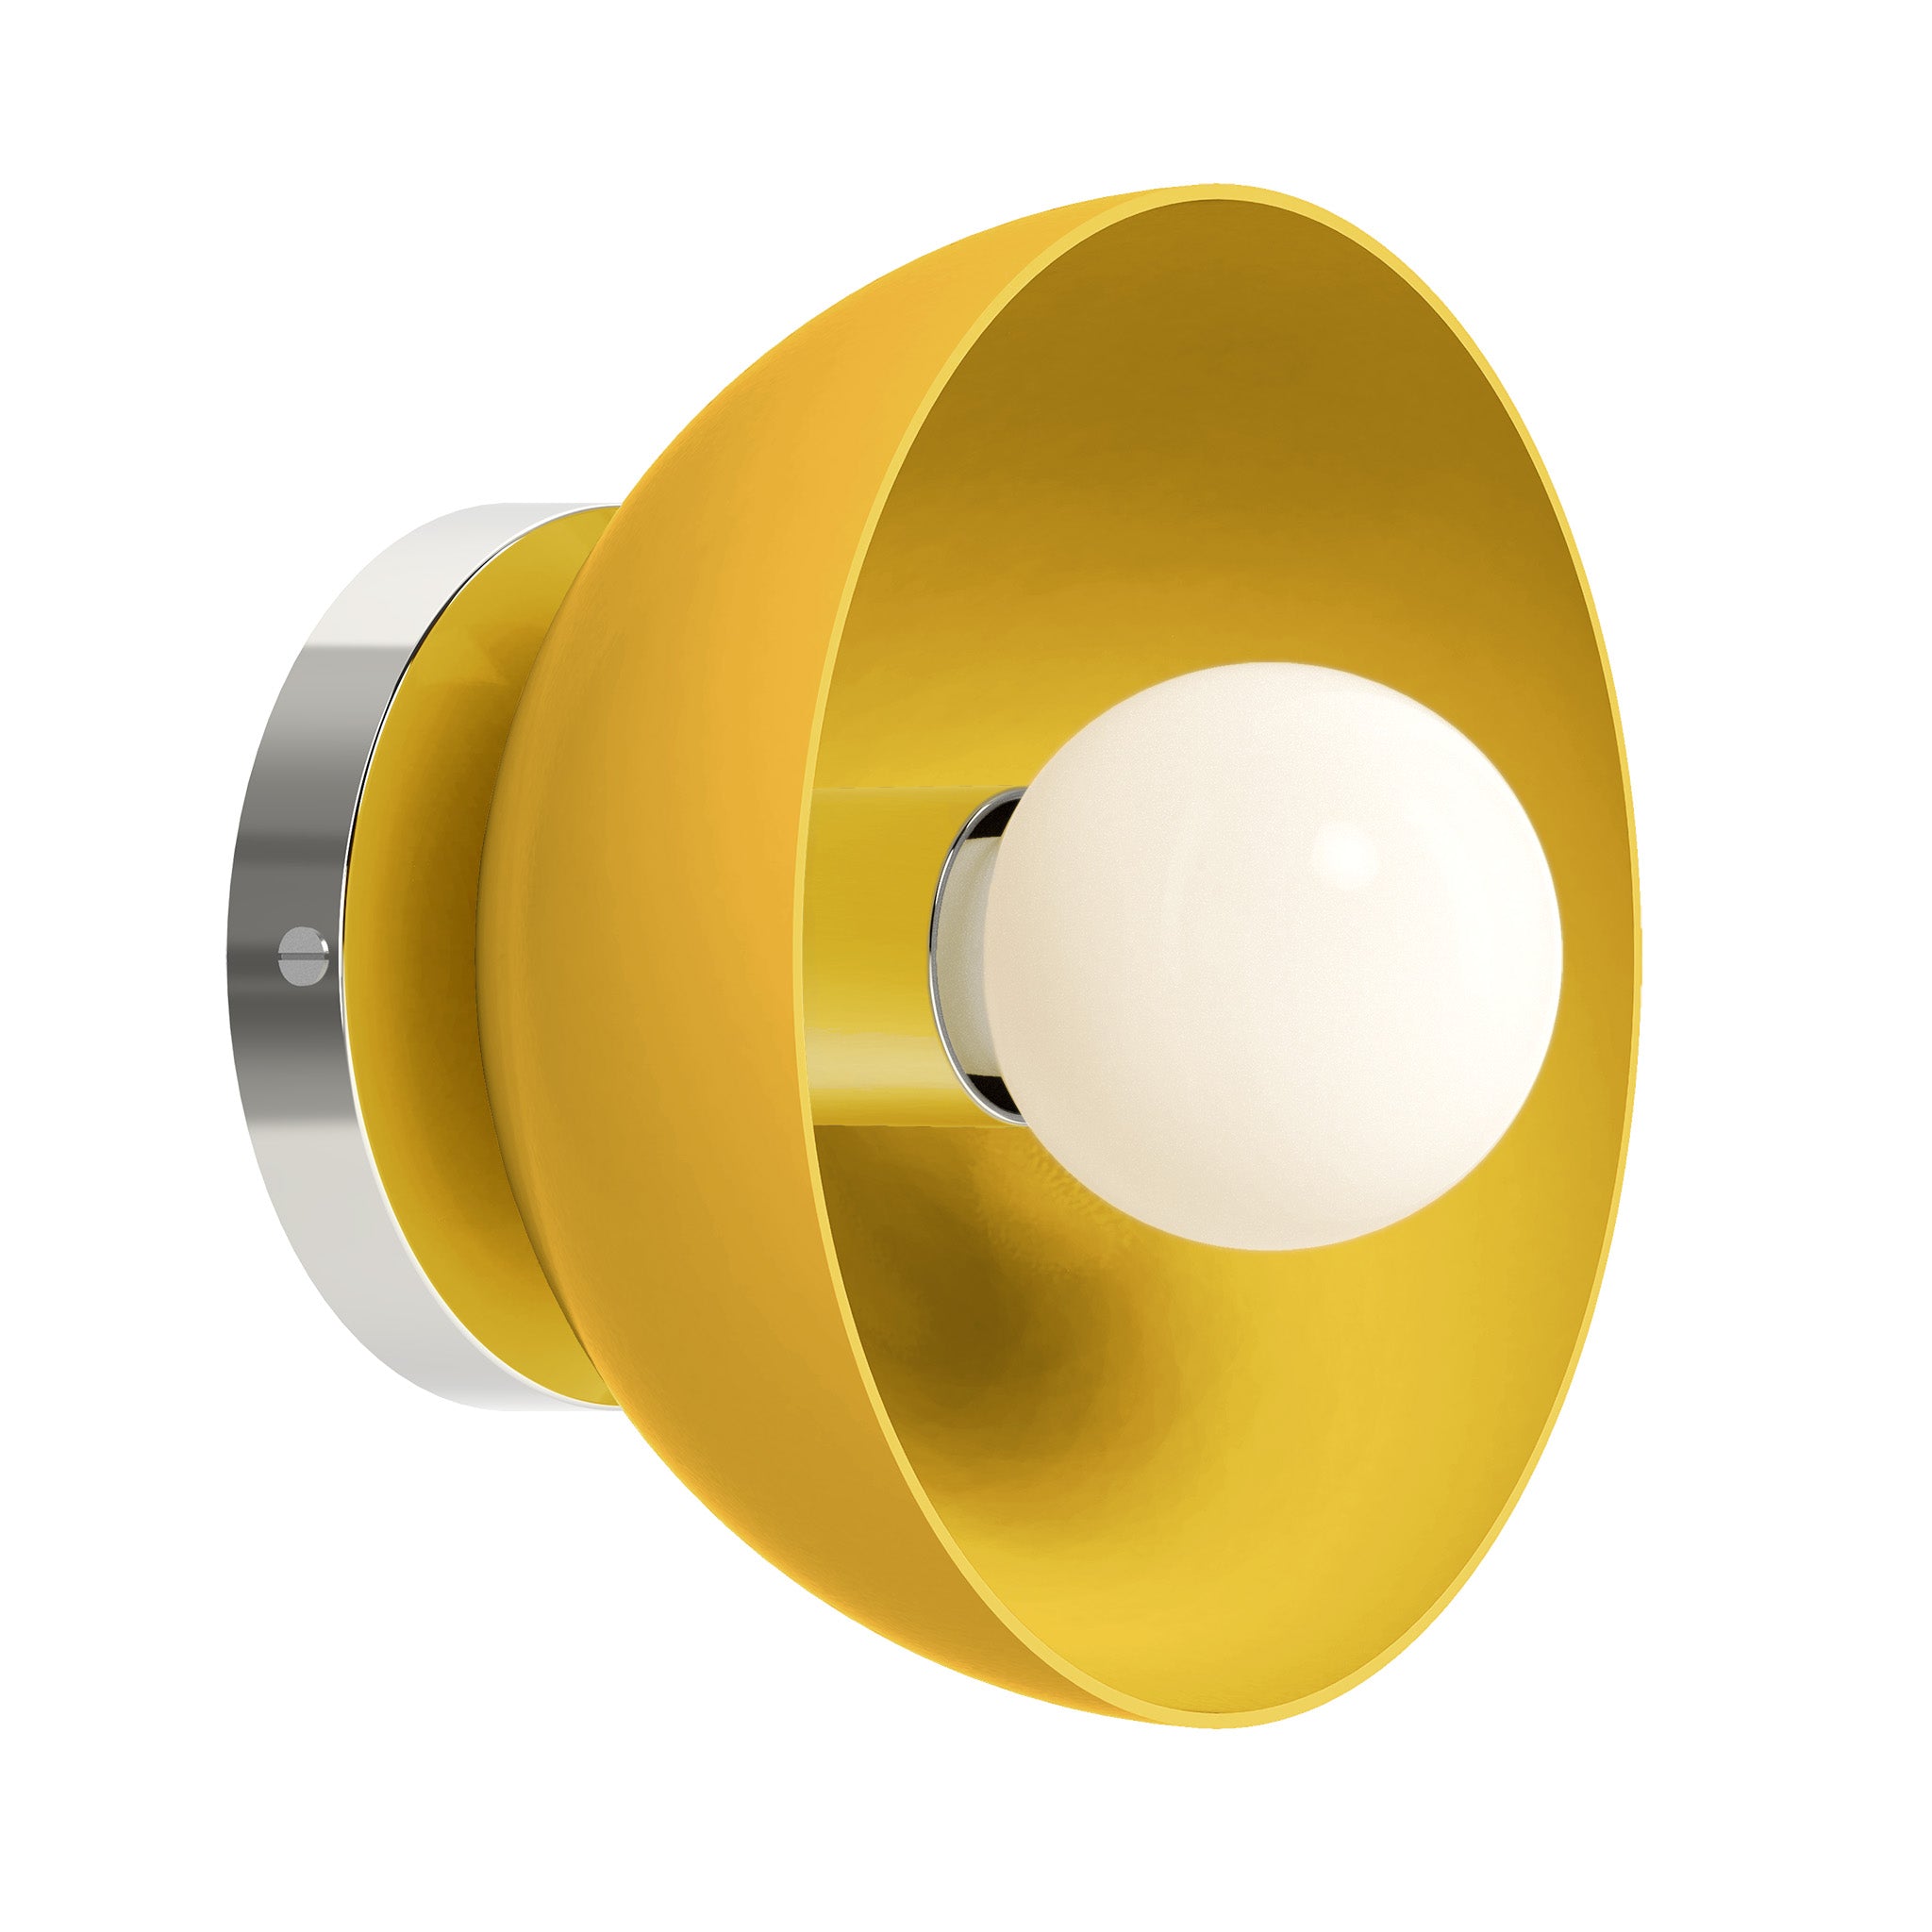 Nickel and ochre color Hemi sconce 8" Dutton Brown lighting